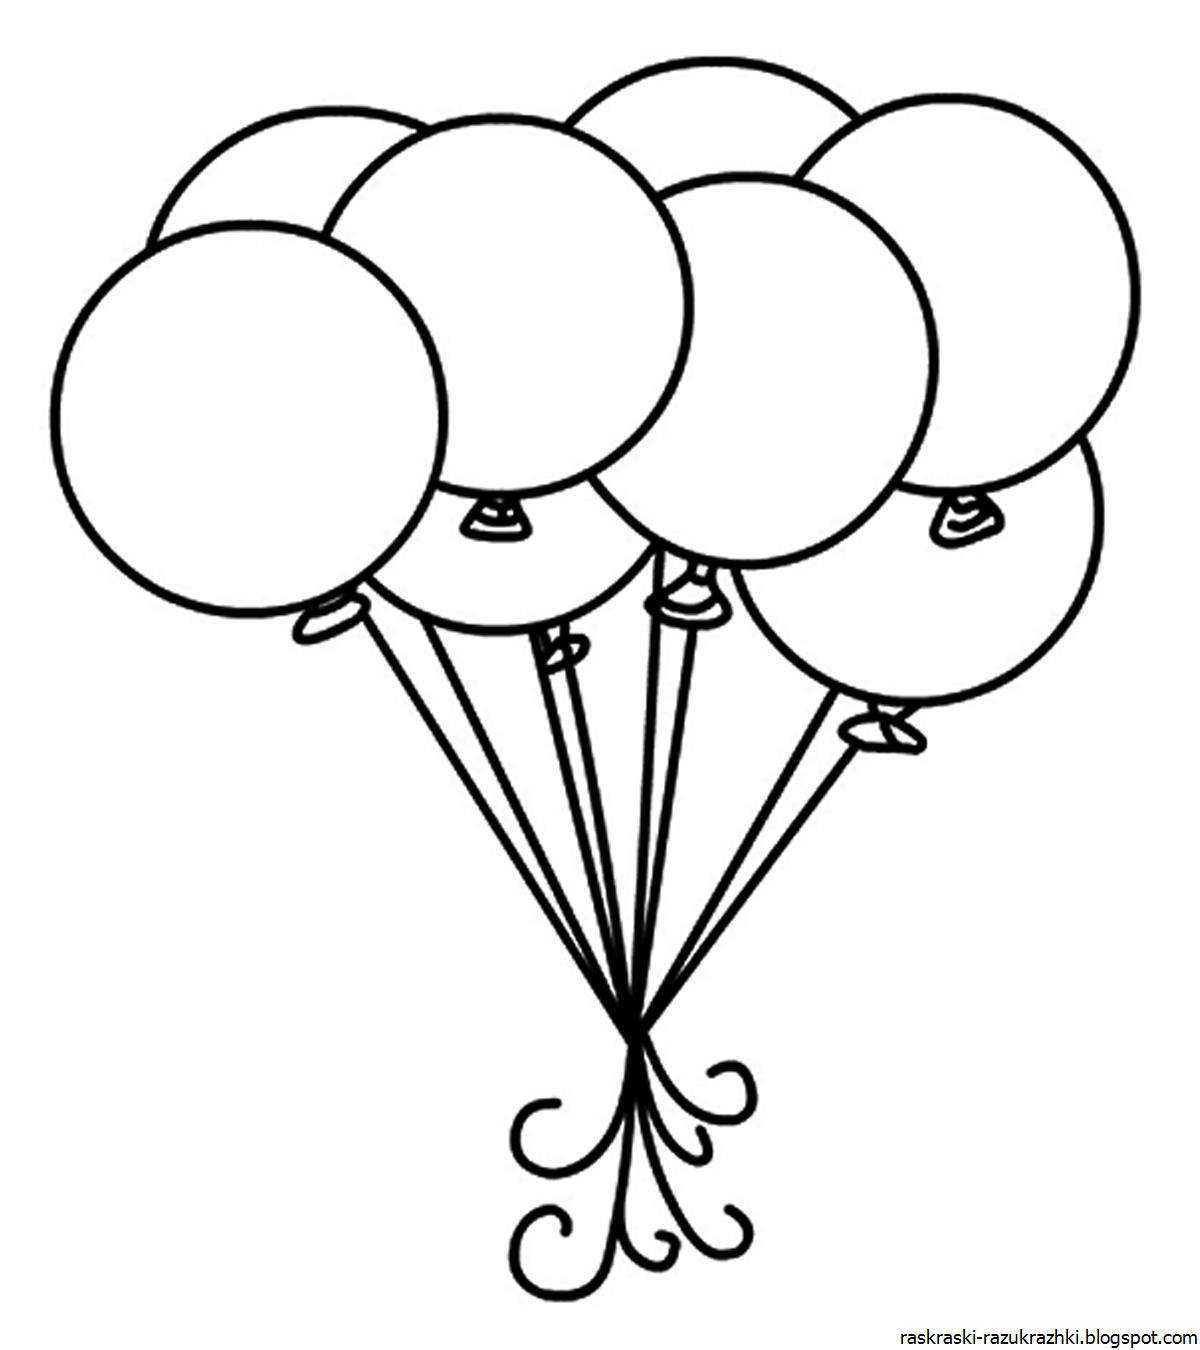 Fat ball coloring page